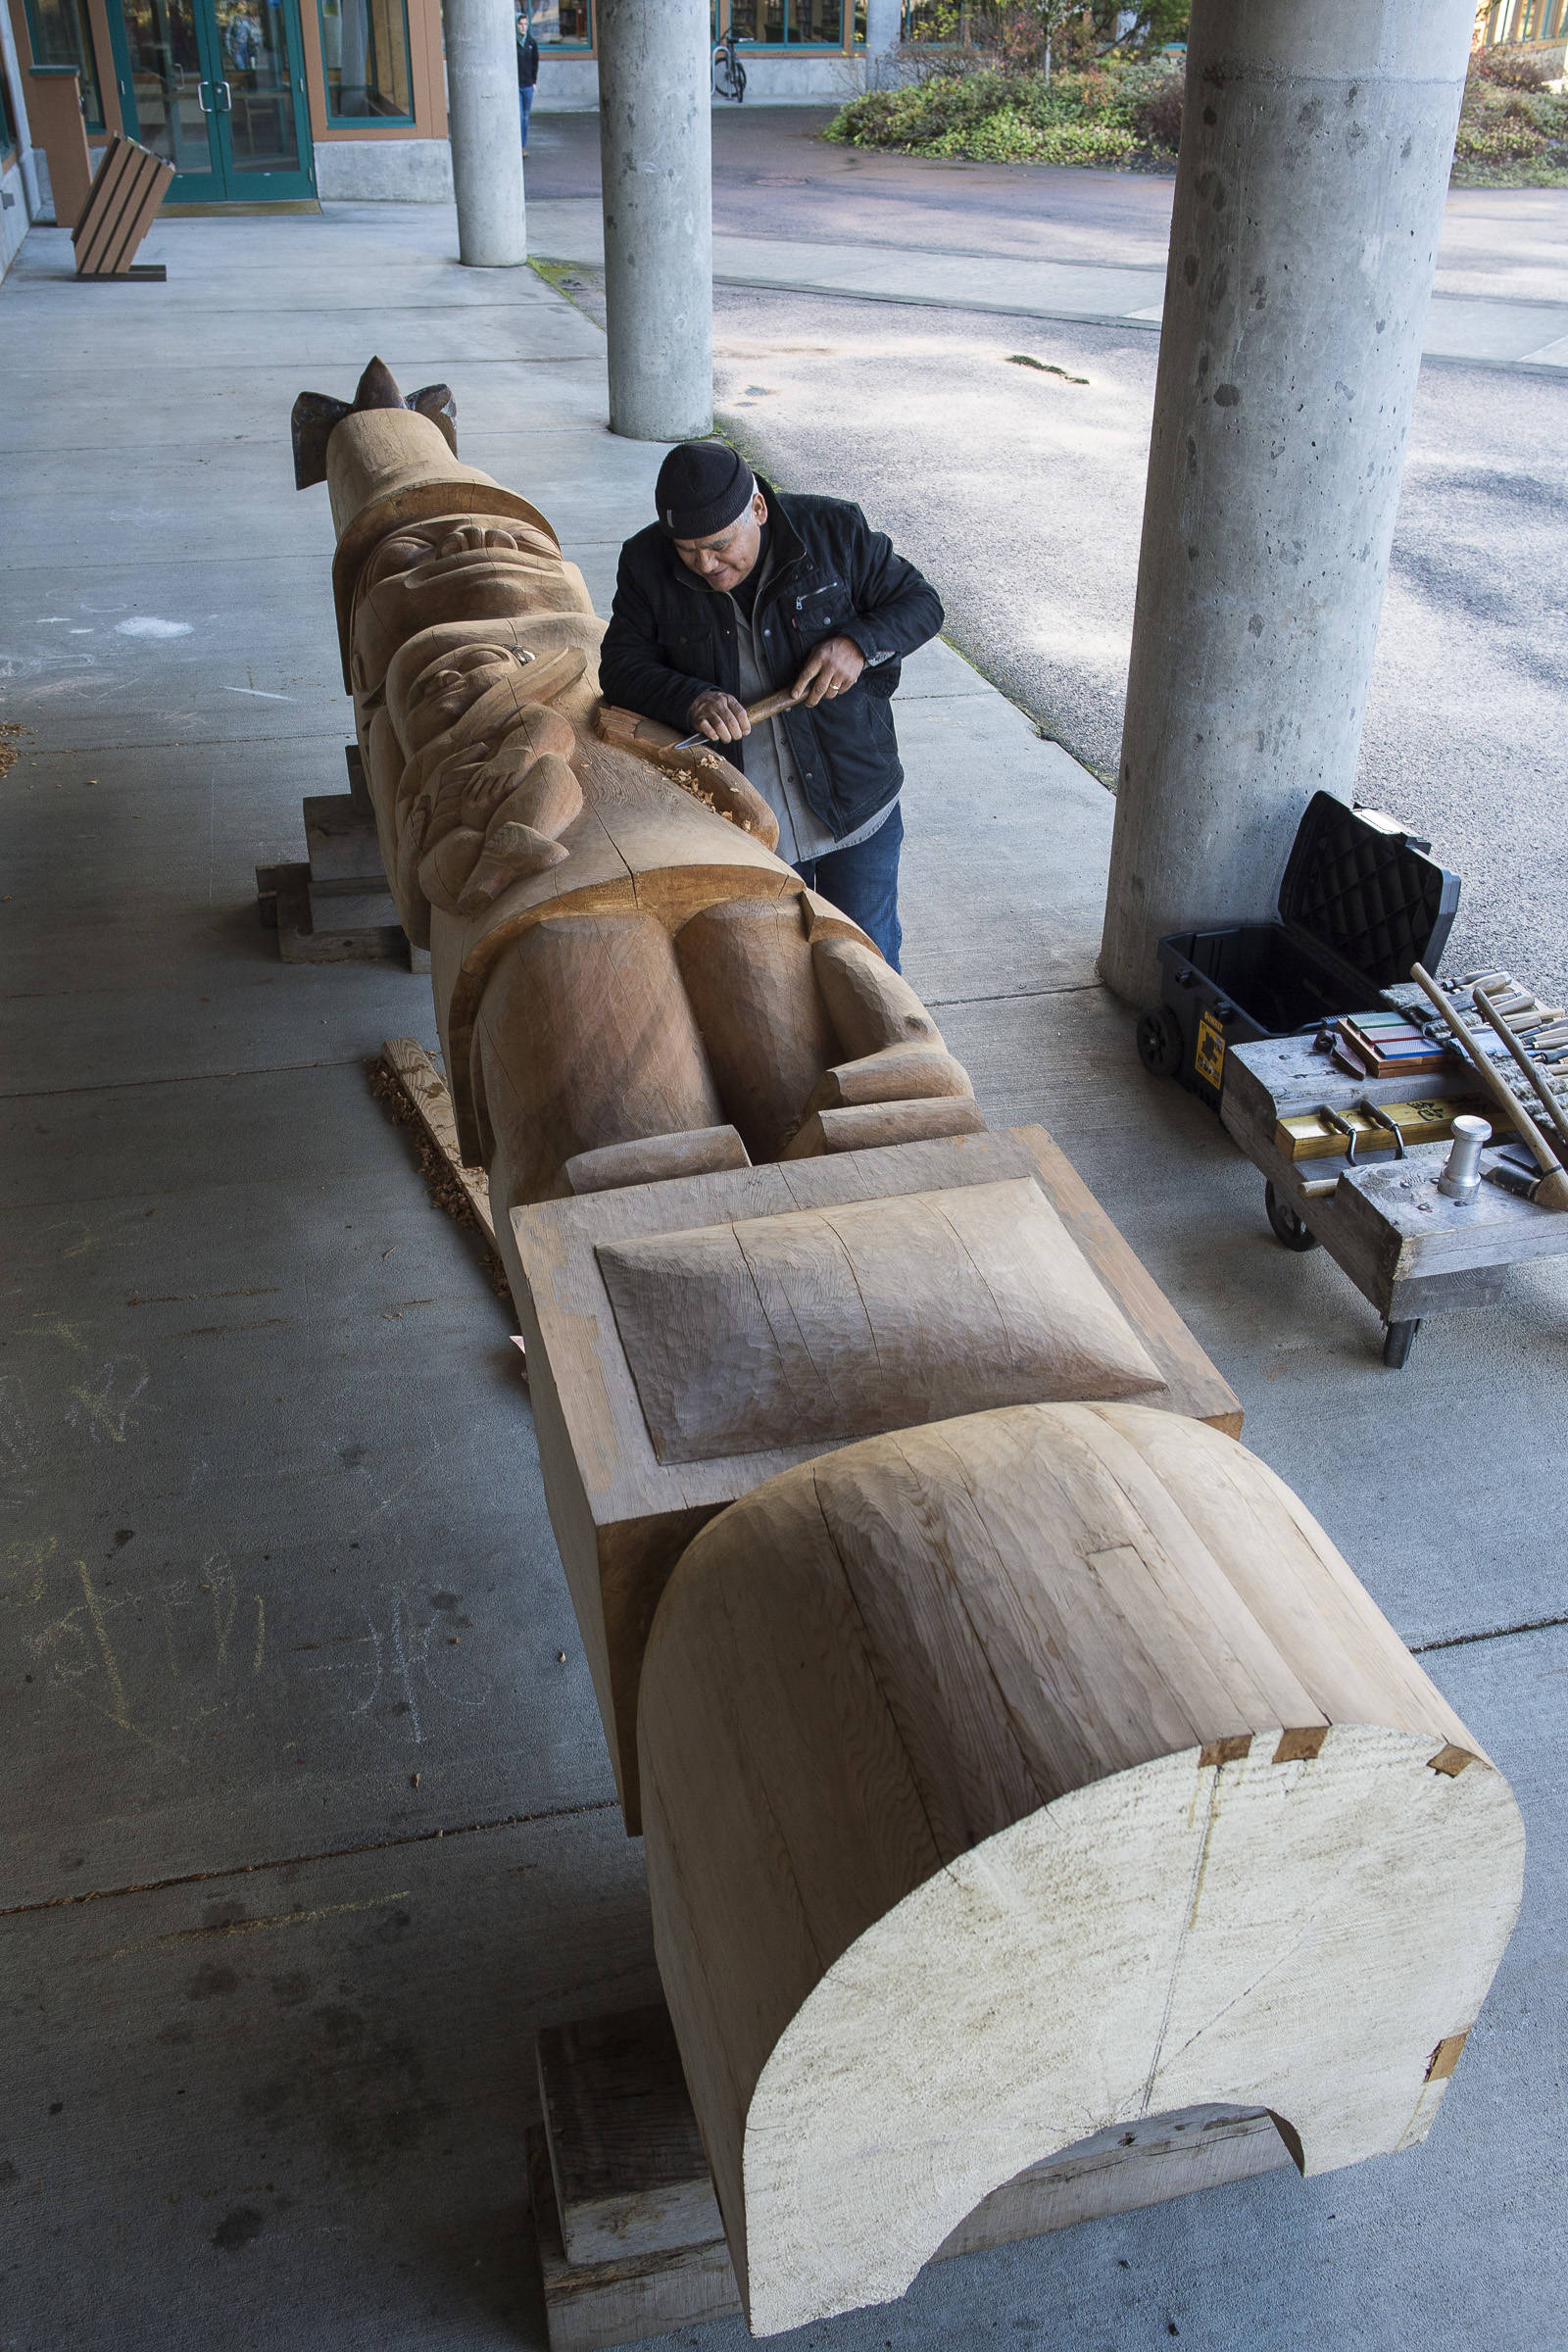 Wayne Price, master Tlingit carver and Associate Professor of Northwest Coast Arts and Sciences, works on a healing pole at the University of Alaska Southeast on Wednesday, Oct. 31, 2018. The pole will be erected with a screen at AWARE’s women’s transitional housing at Twin Lakes in April. (Michael Penn | Capital City Weekly)